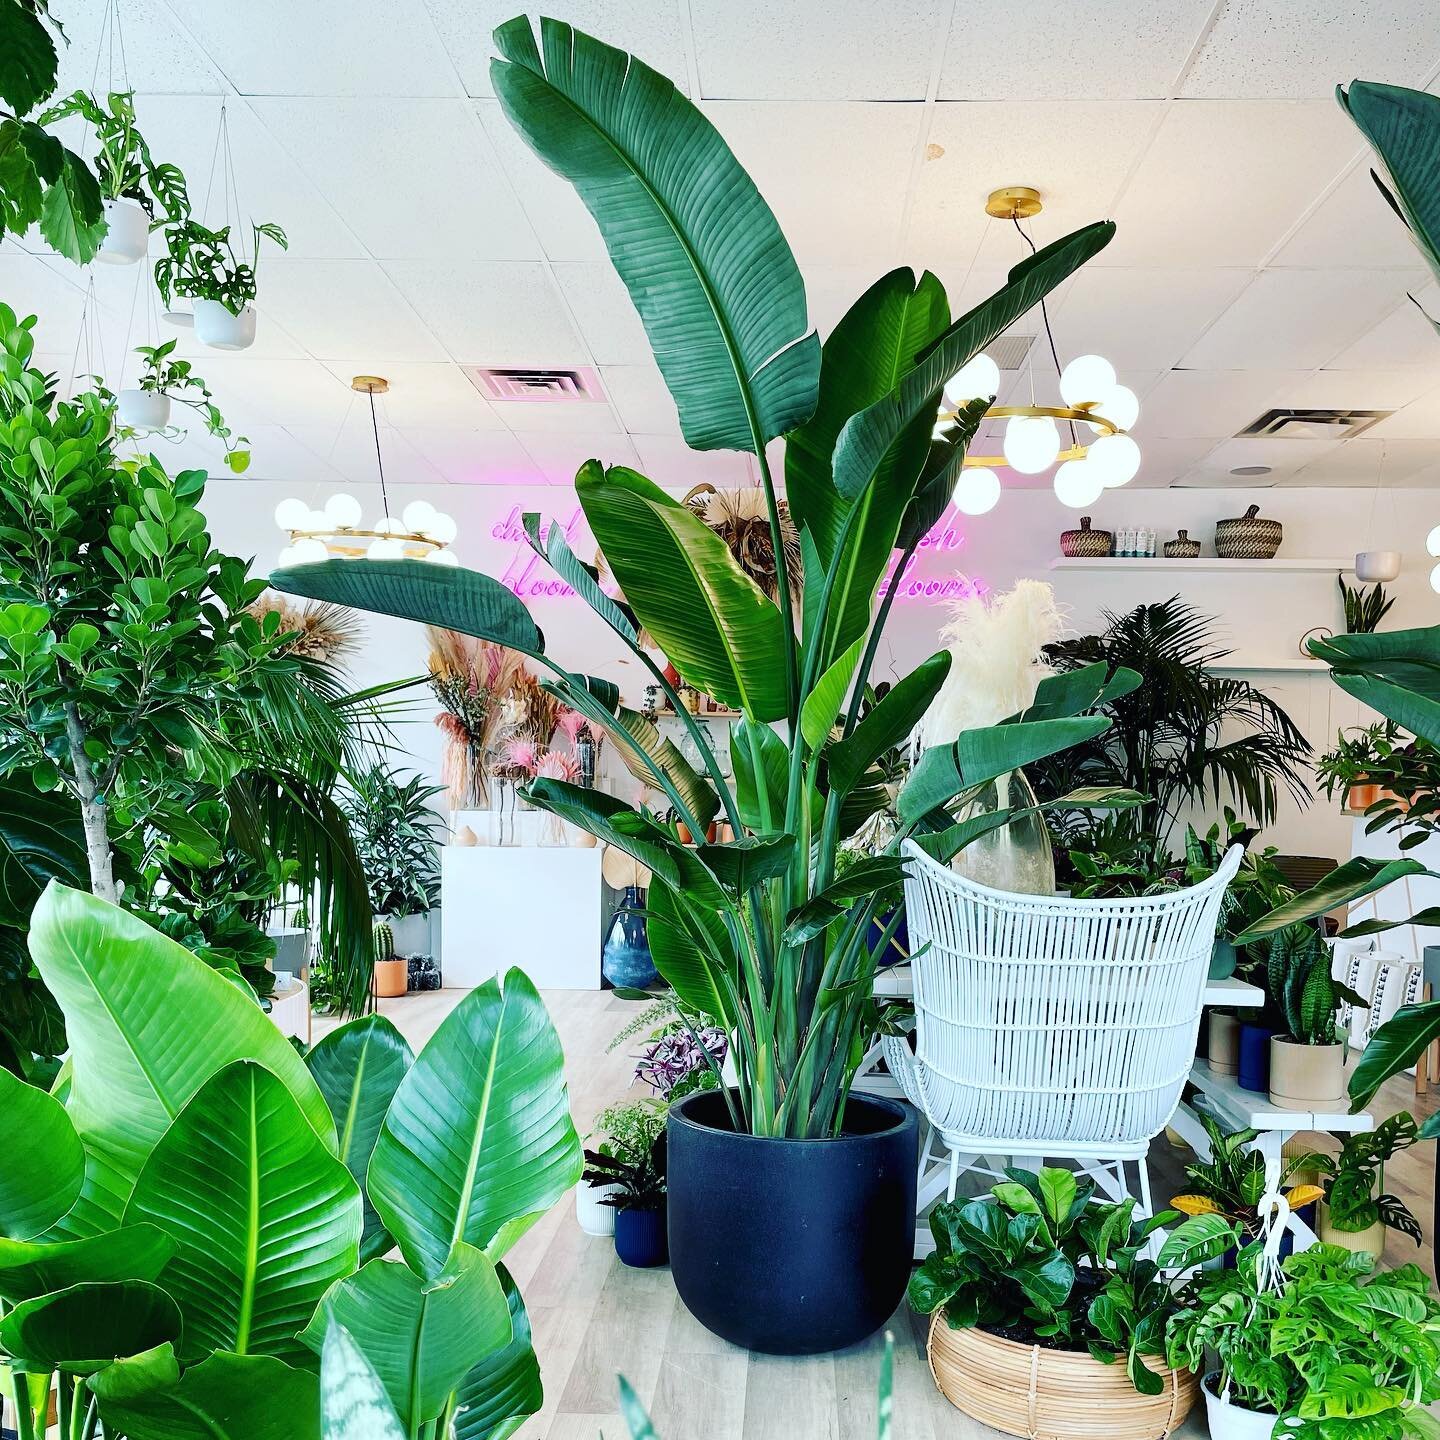 ❤️🌿Happy Friday my plant junkies!!! How spectacular is this 11 ft tall BIRD OF PARADISE 😱😍. I can&rsquo;t wait to find a super amazing home with mega ceilings for this beauty. The Botanical Boutique is fully loaded with everything your little gree